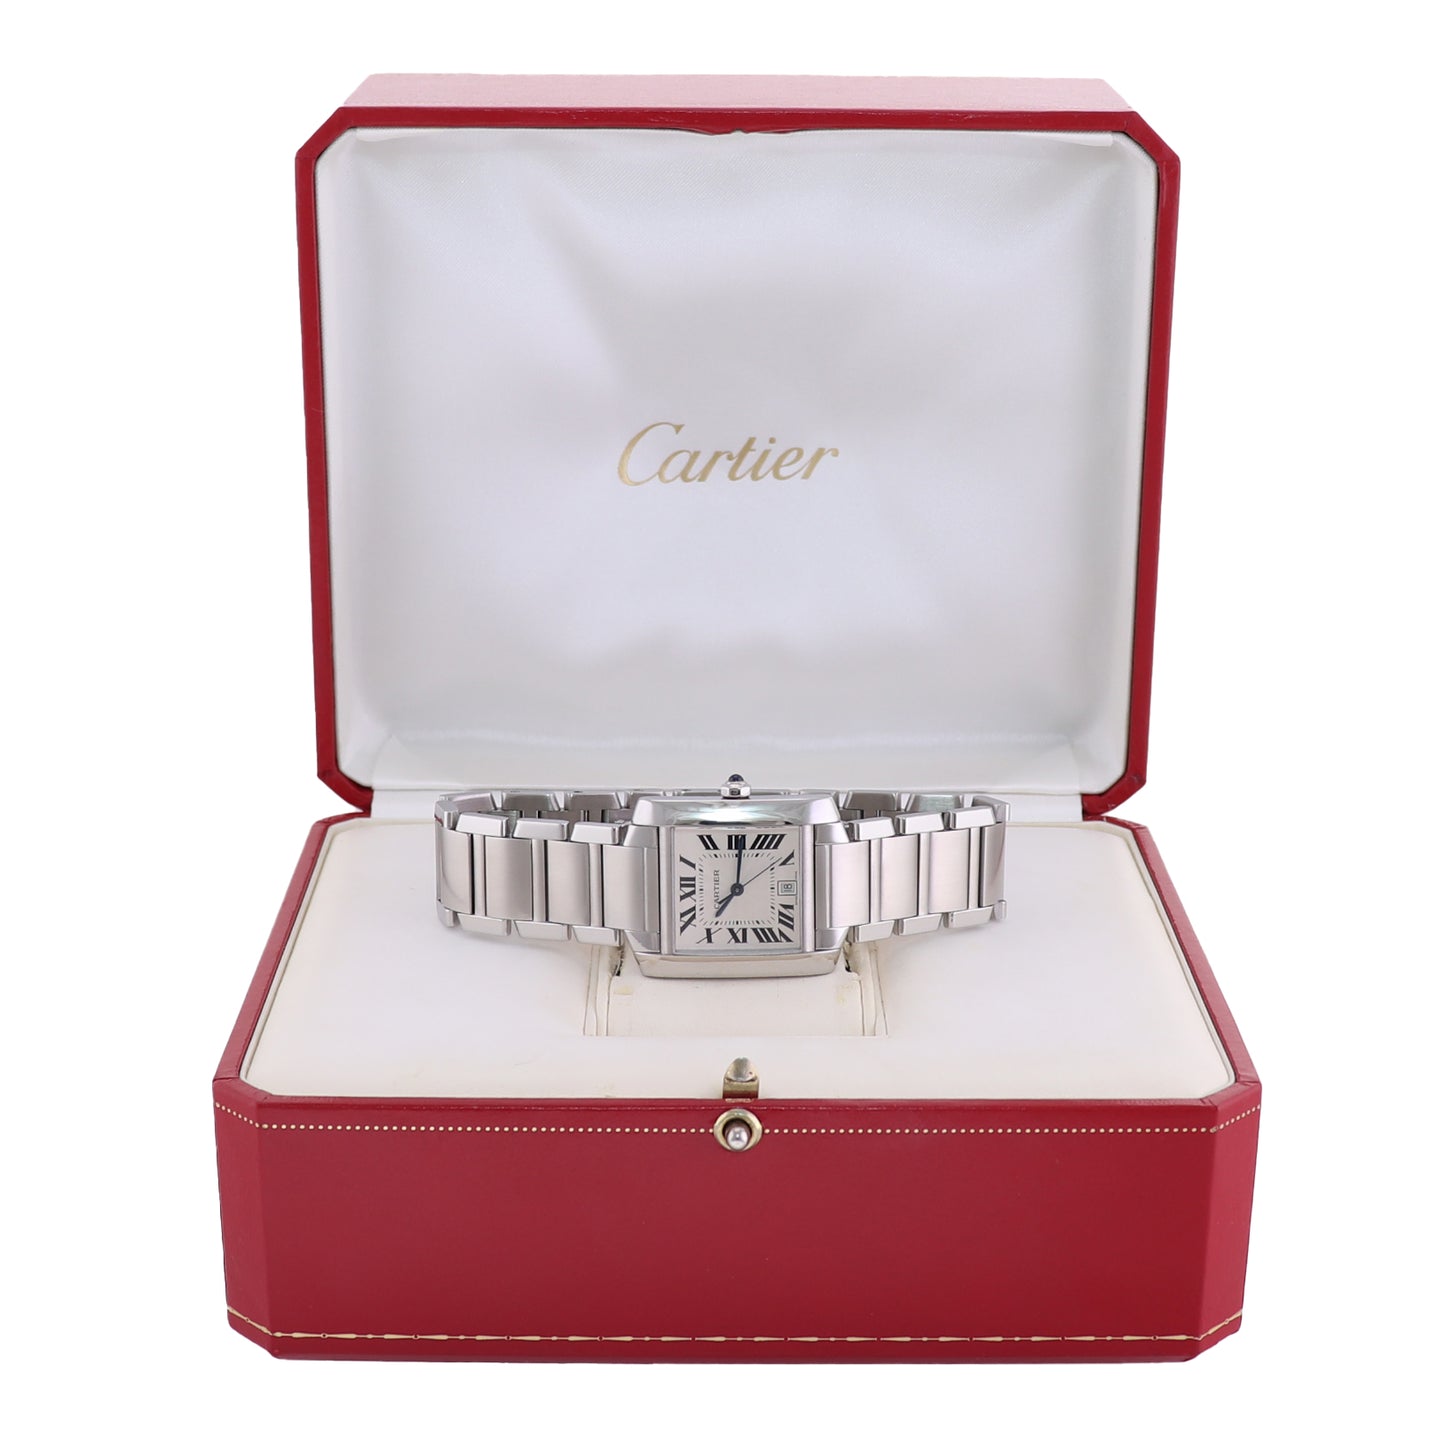 MINT Cartier Tank Francaise 2302 Large Size Stainless Steel White Roman Automatic Watch Box